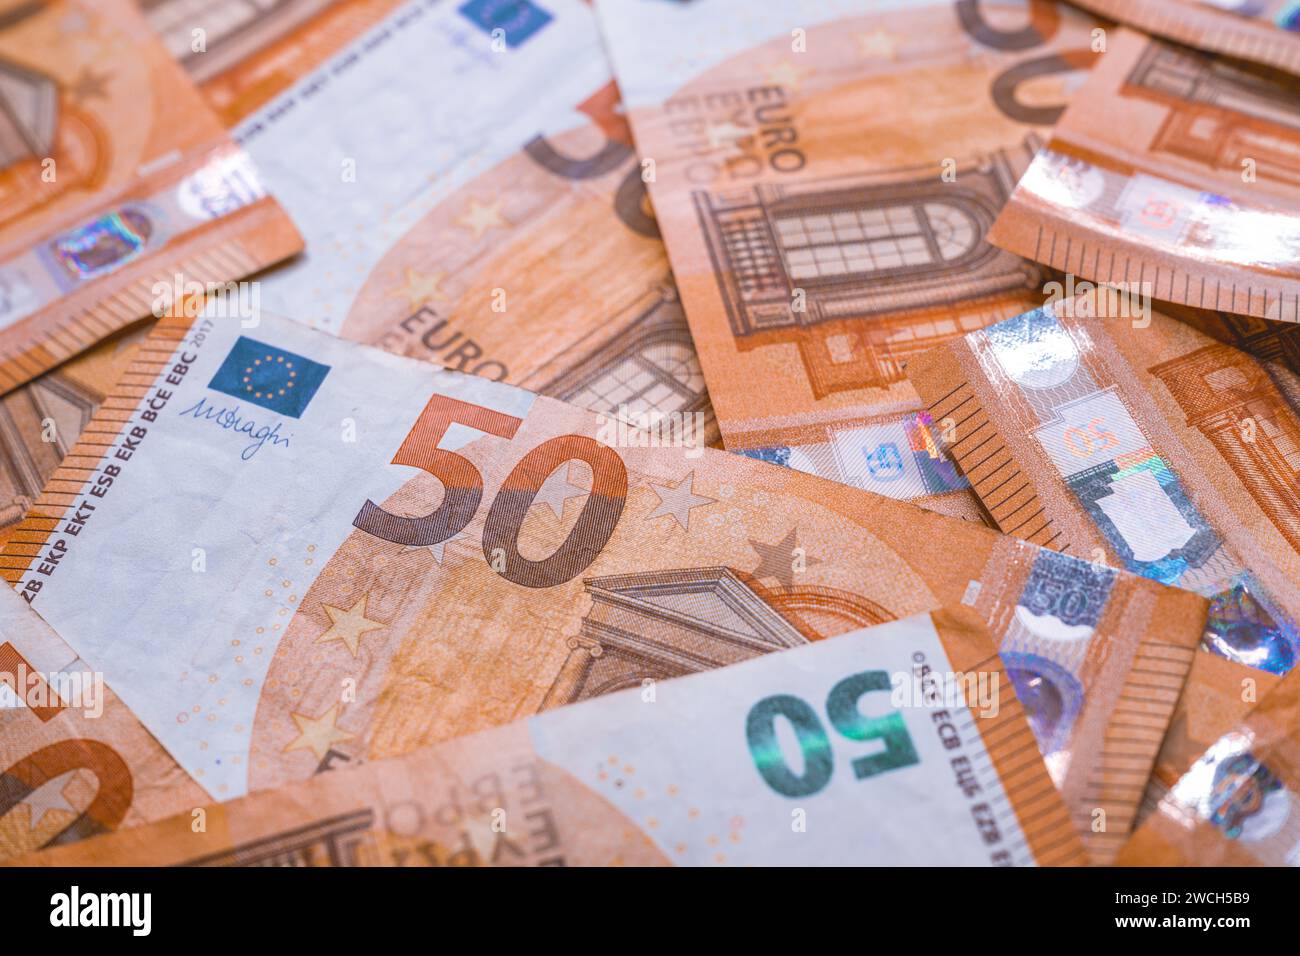 Pile of fifty euro banknotes, business and finance concept Stock Photo